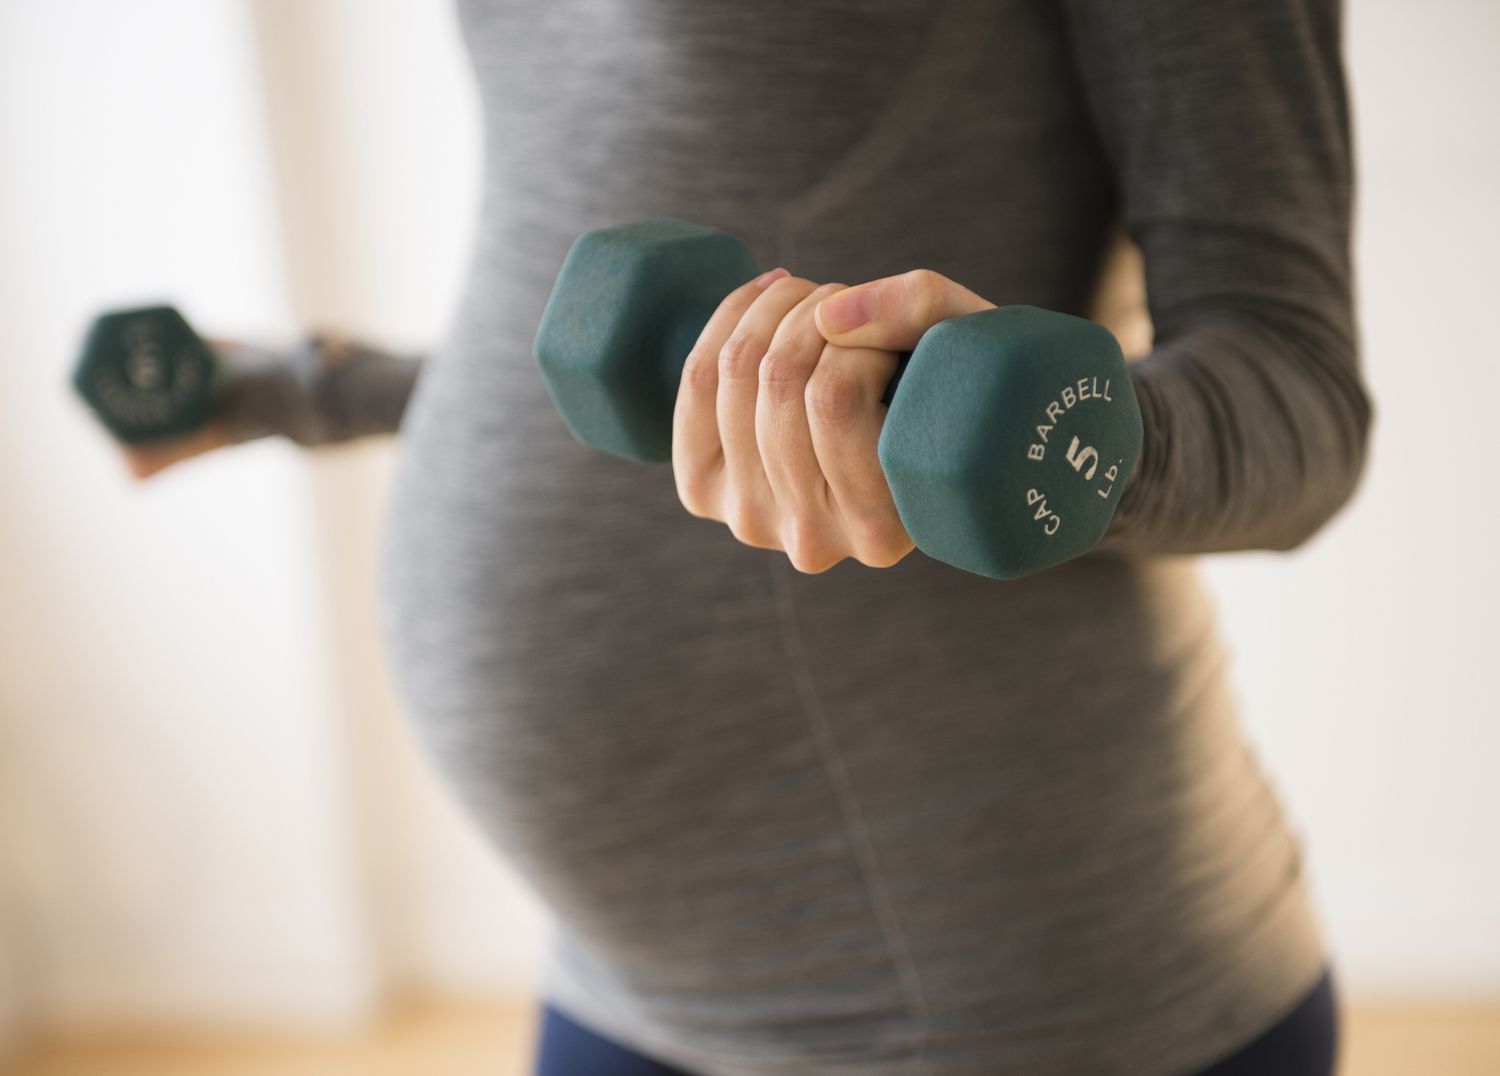 New Research Seeks to Improve Safety Equipment for Pregnant Women